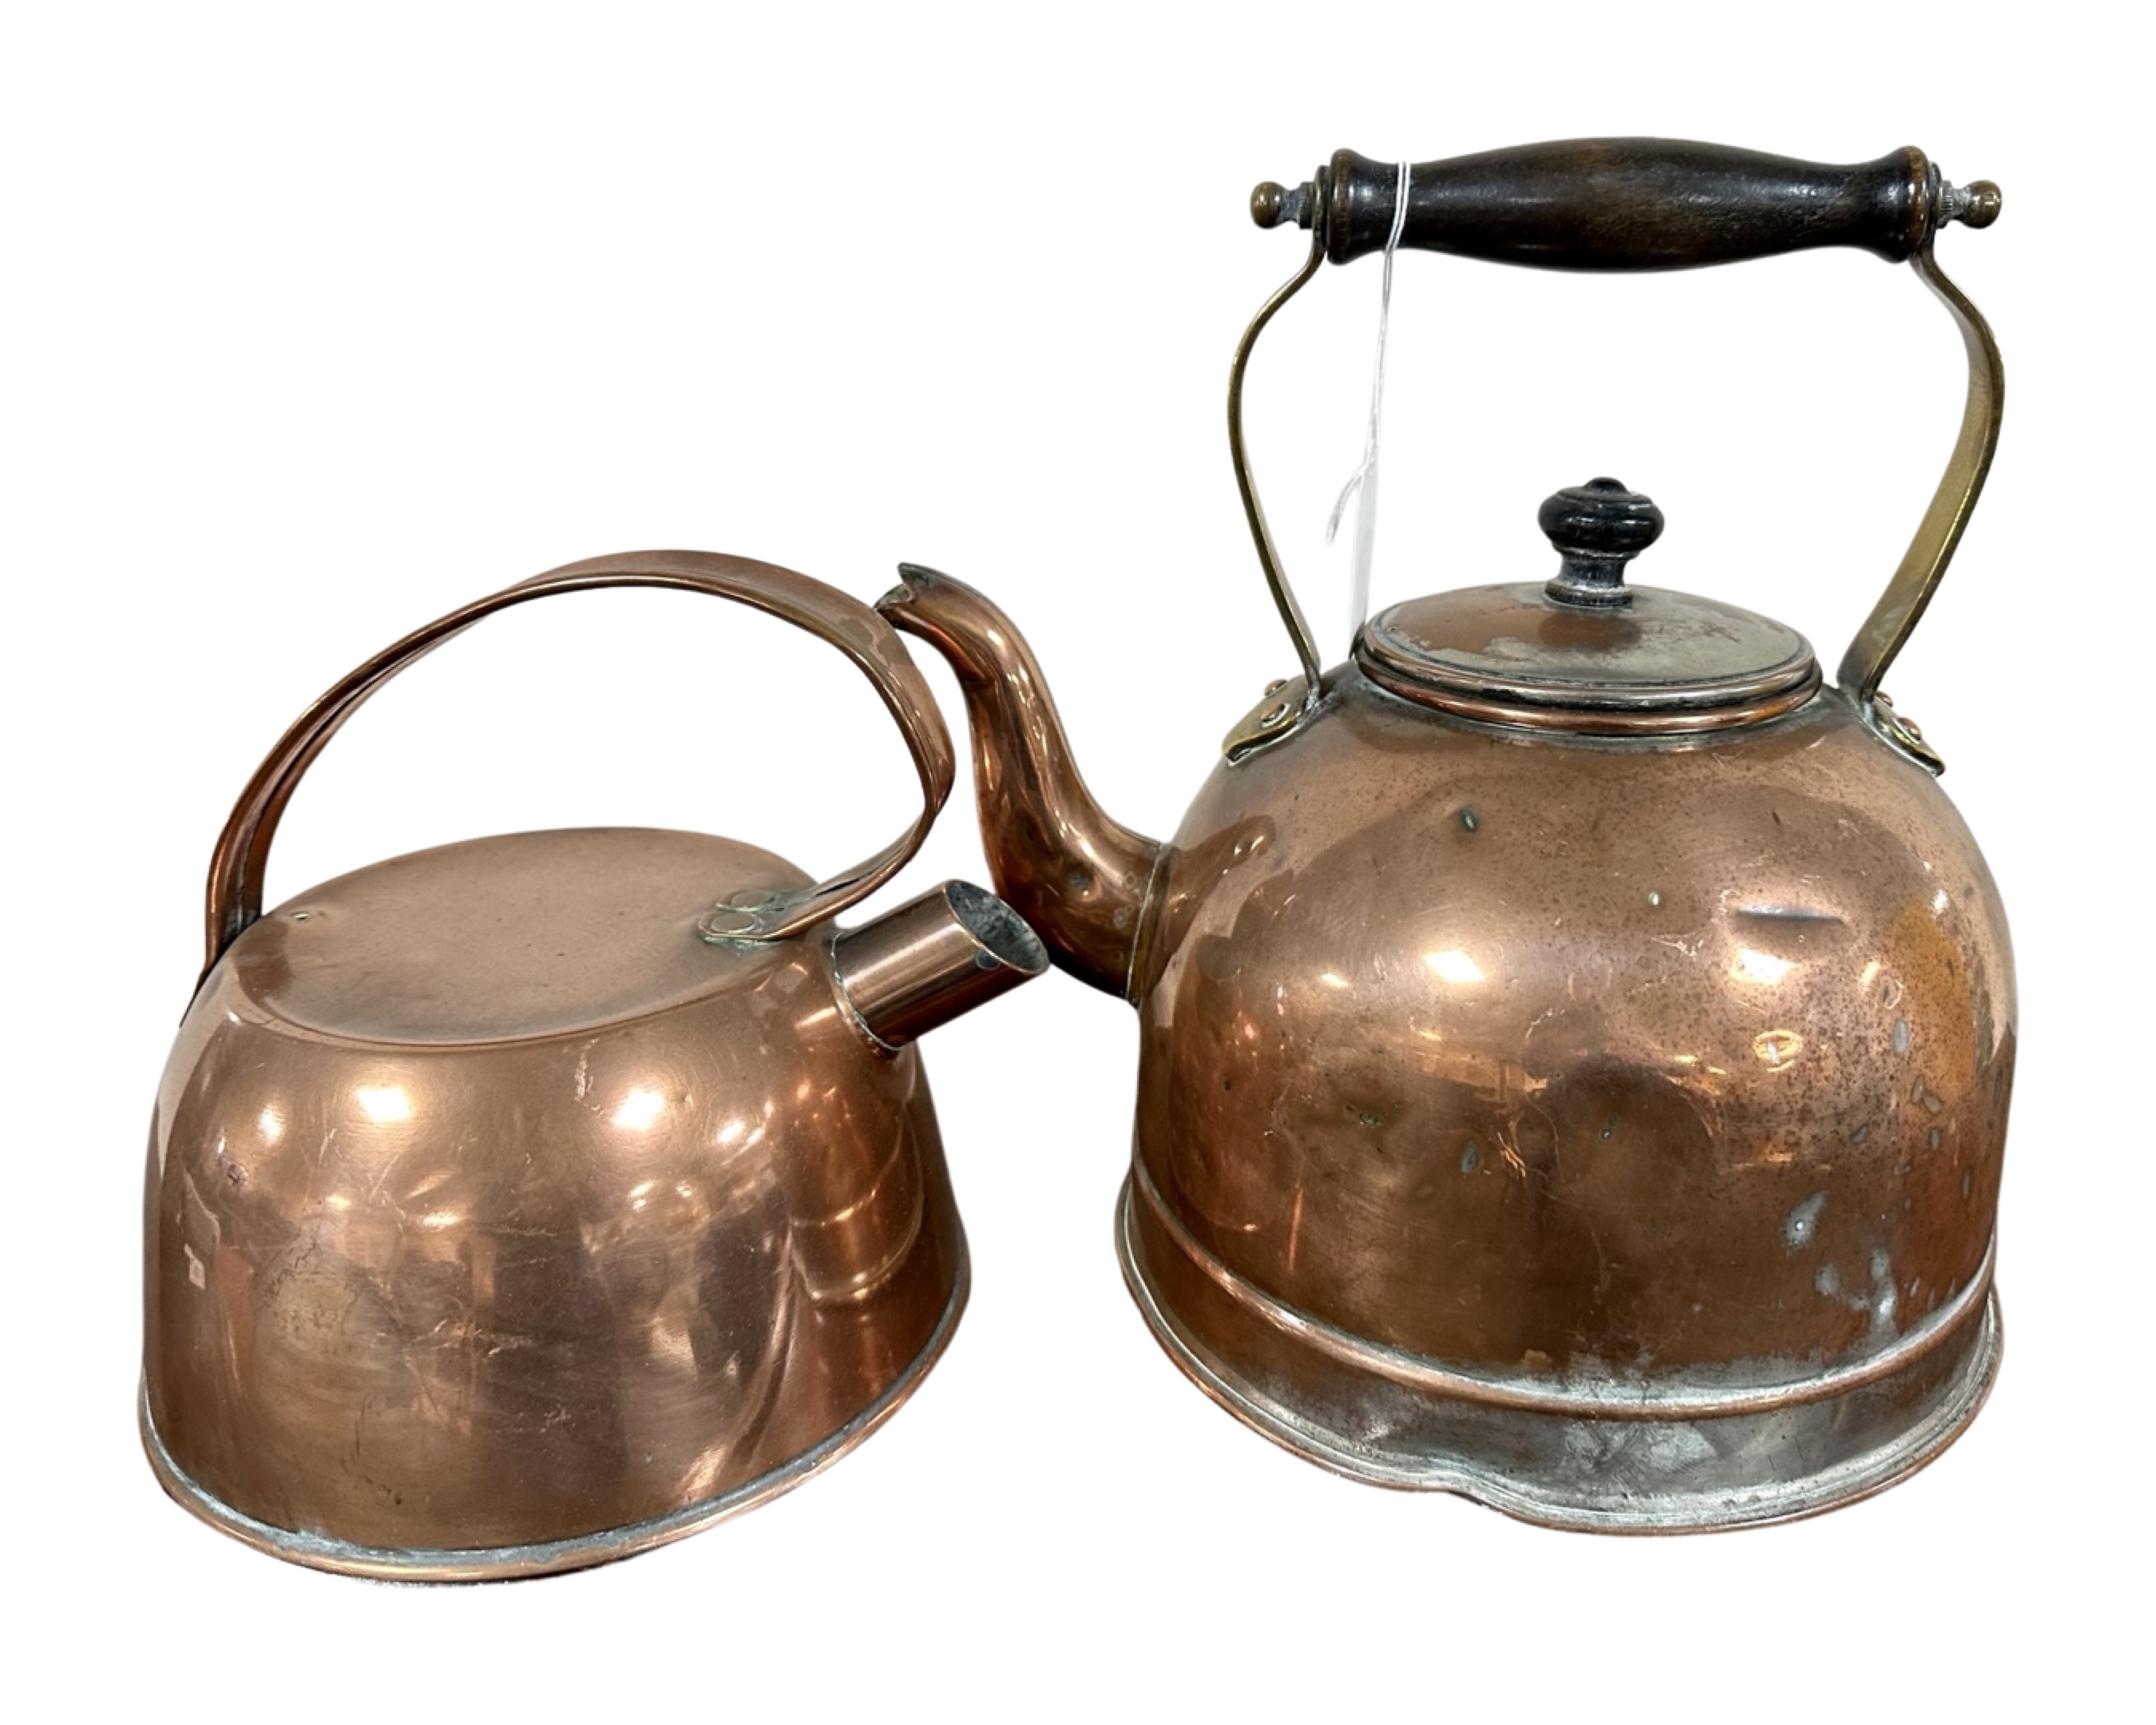 Two copper kettles, one with brass and beech handle.